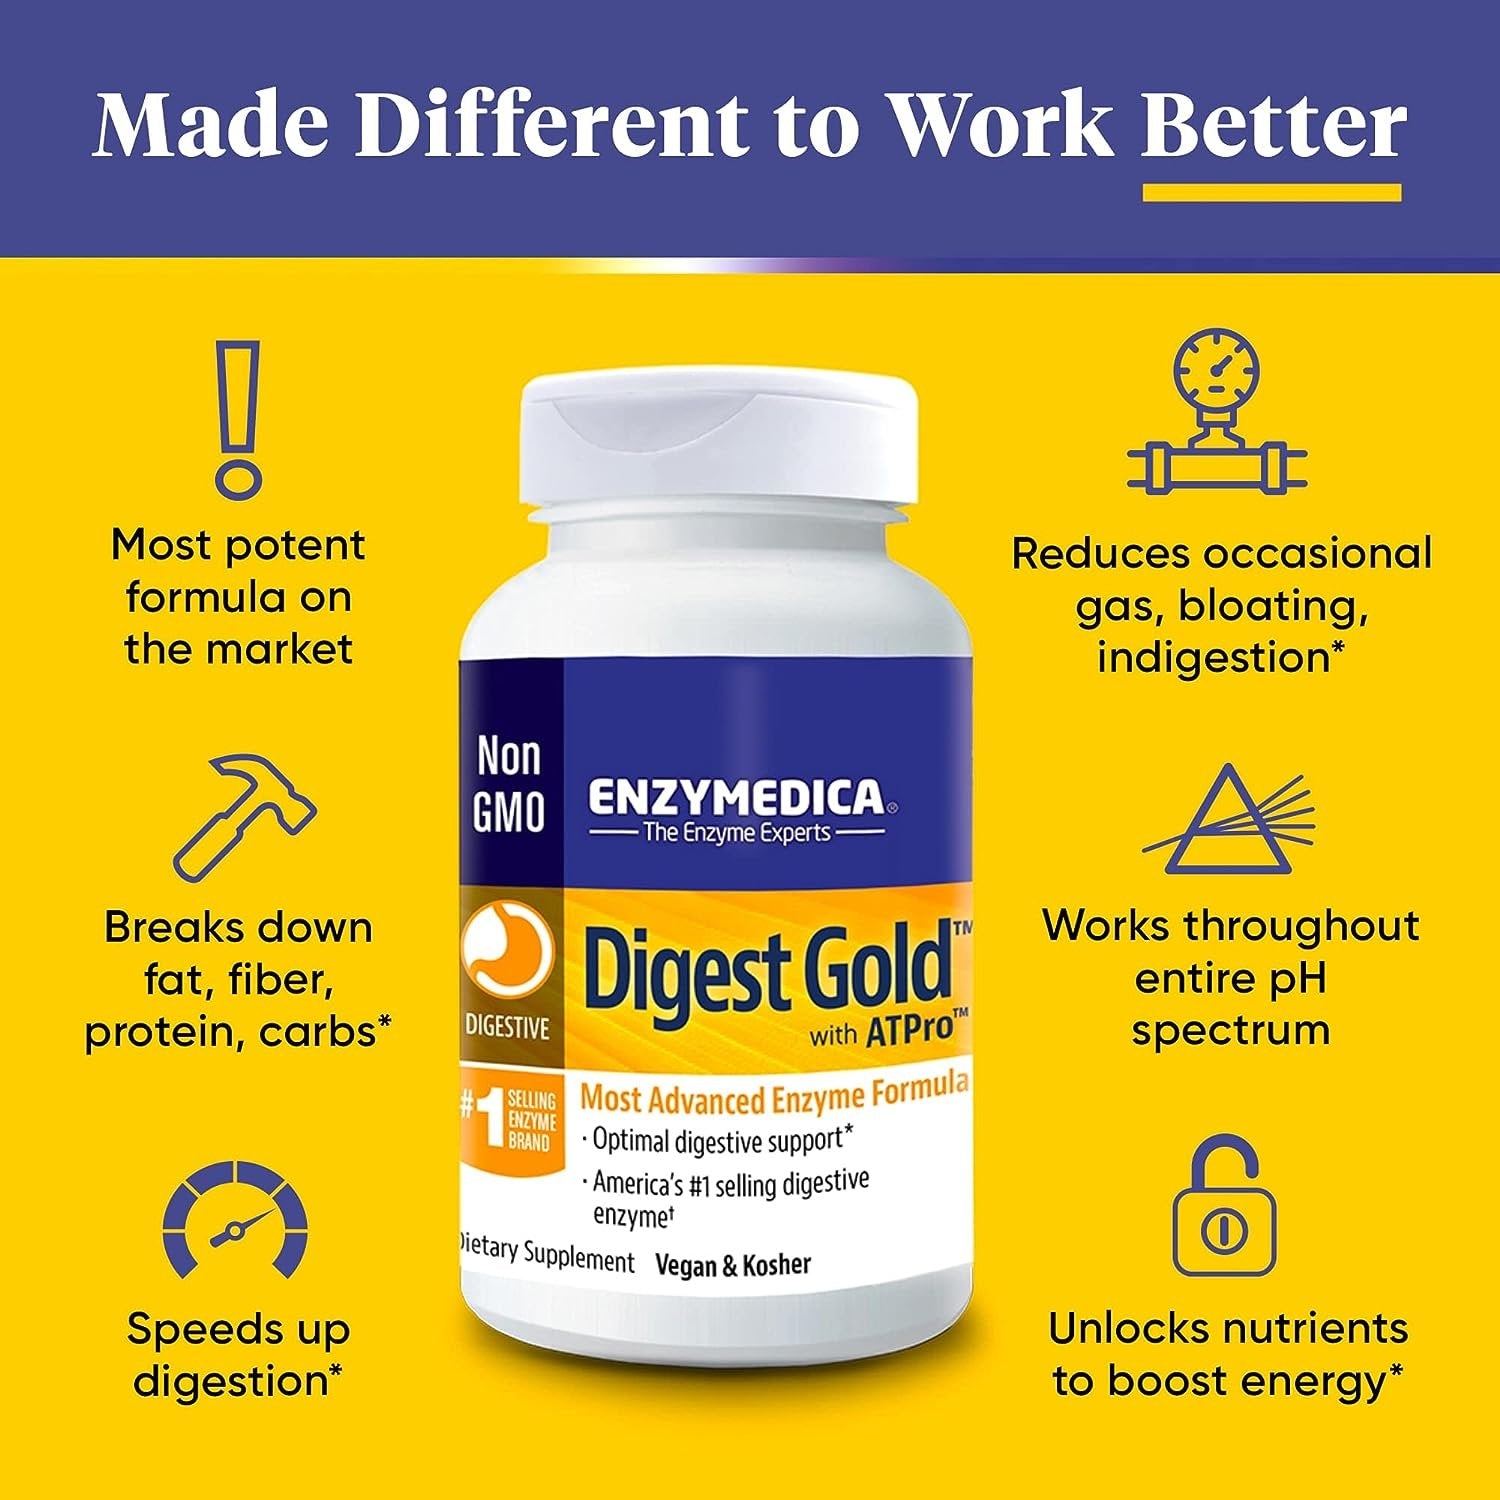 Enzymedica Digest Gold + ATPro, Maximum Strength Enzyme Formula, Prevents Bloating and Gas, 14 Key Enzymes Including Amylase, Protease, Lipase and Lactase, 180 Capsules (FFP)